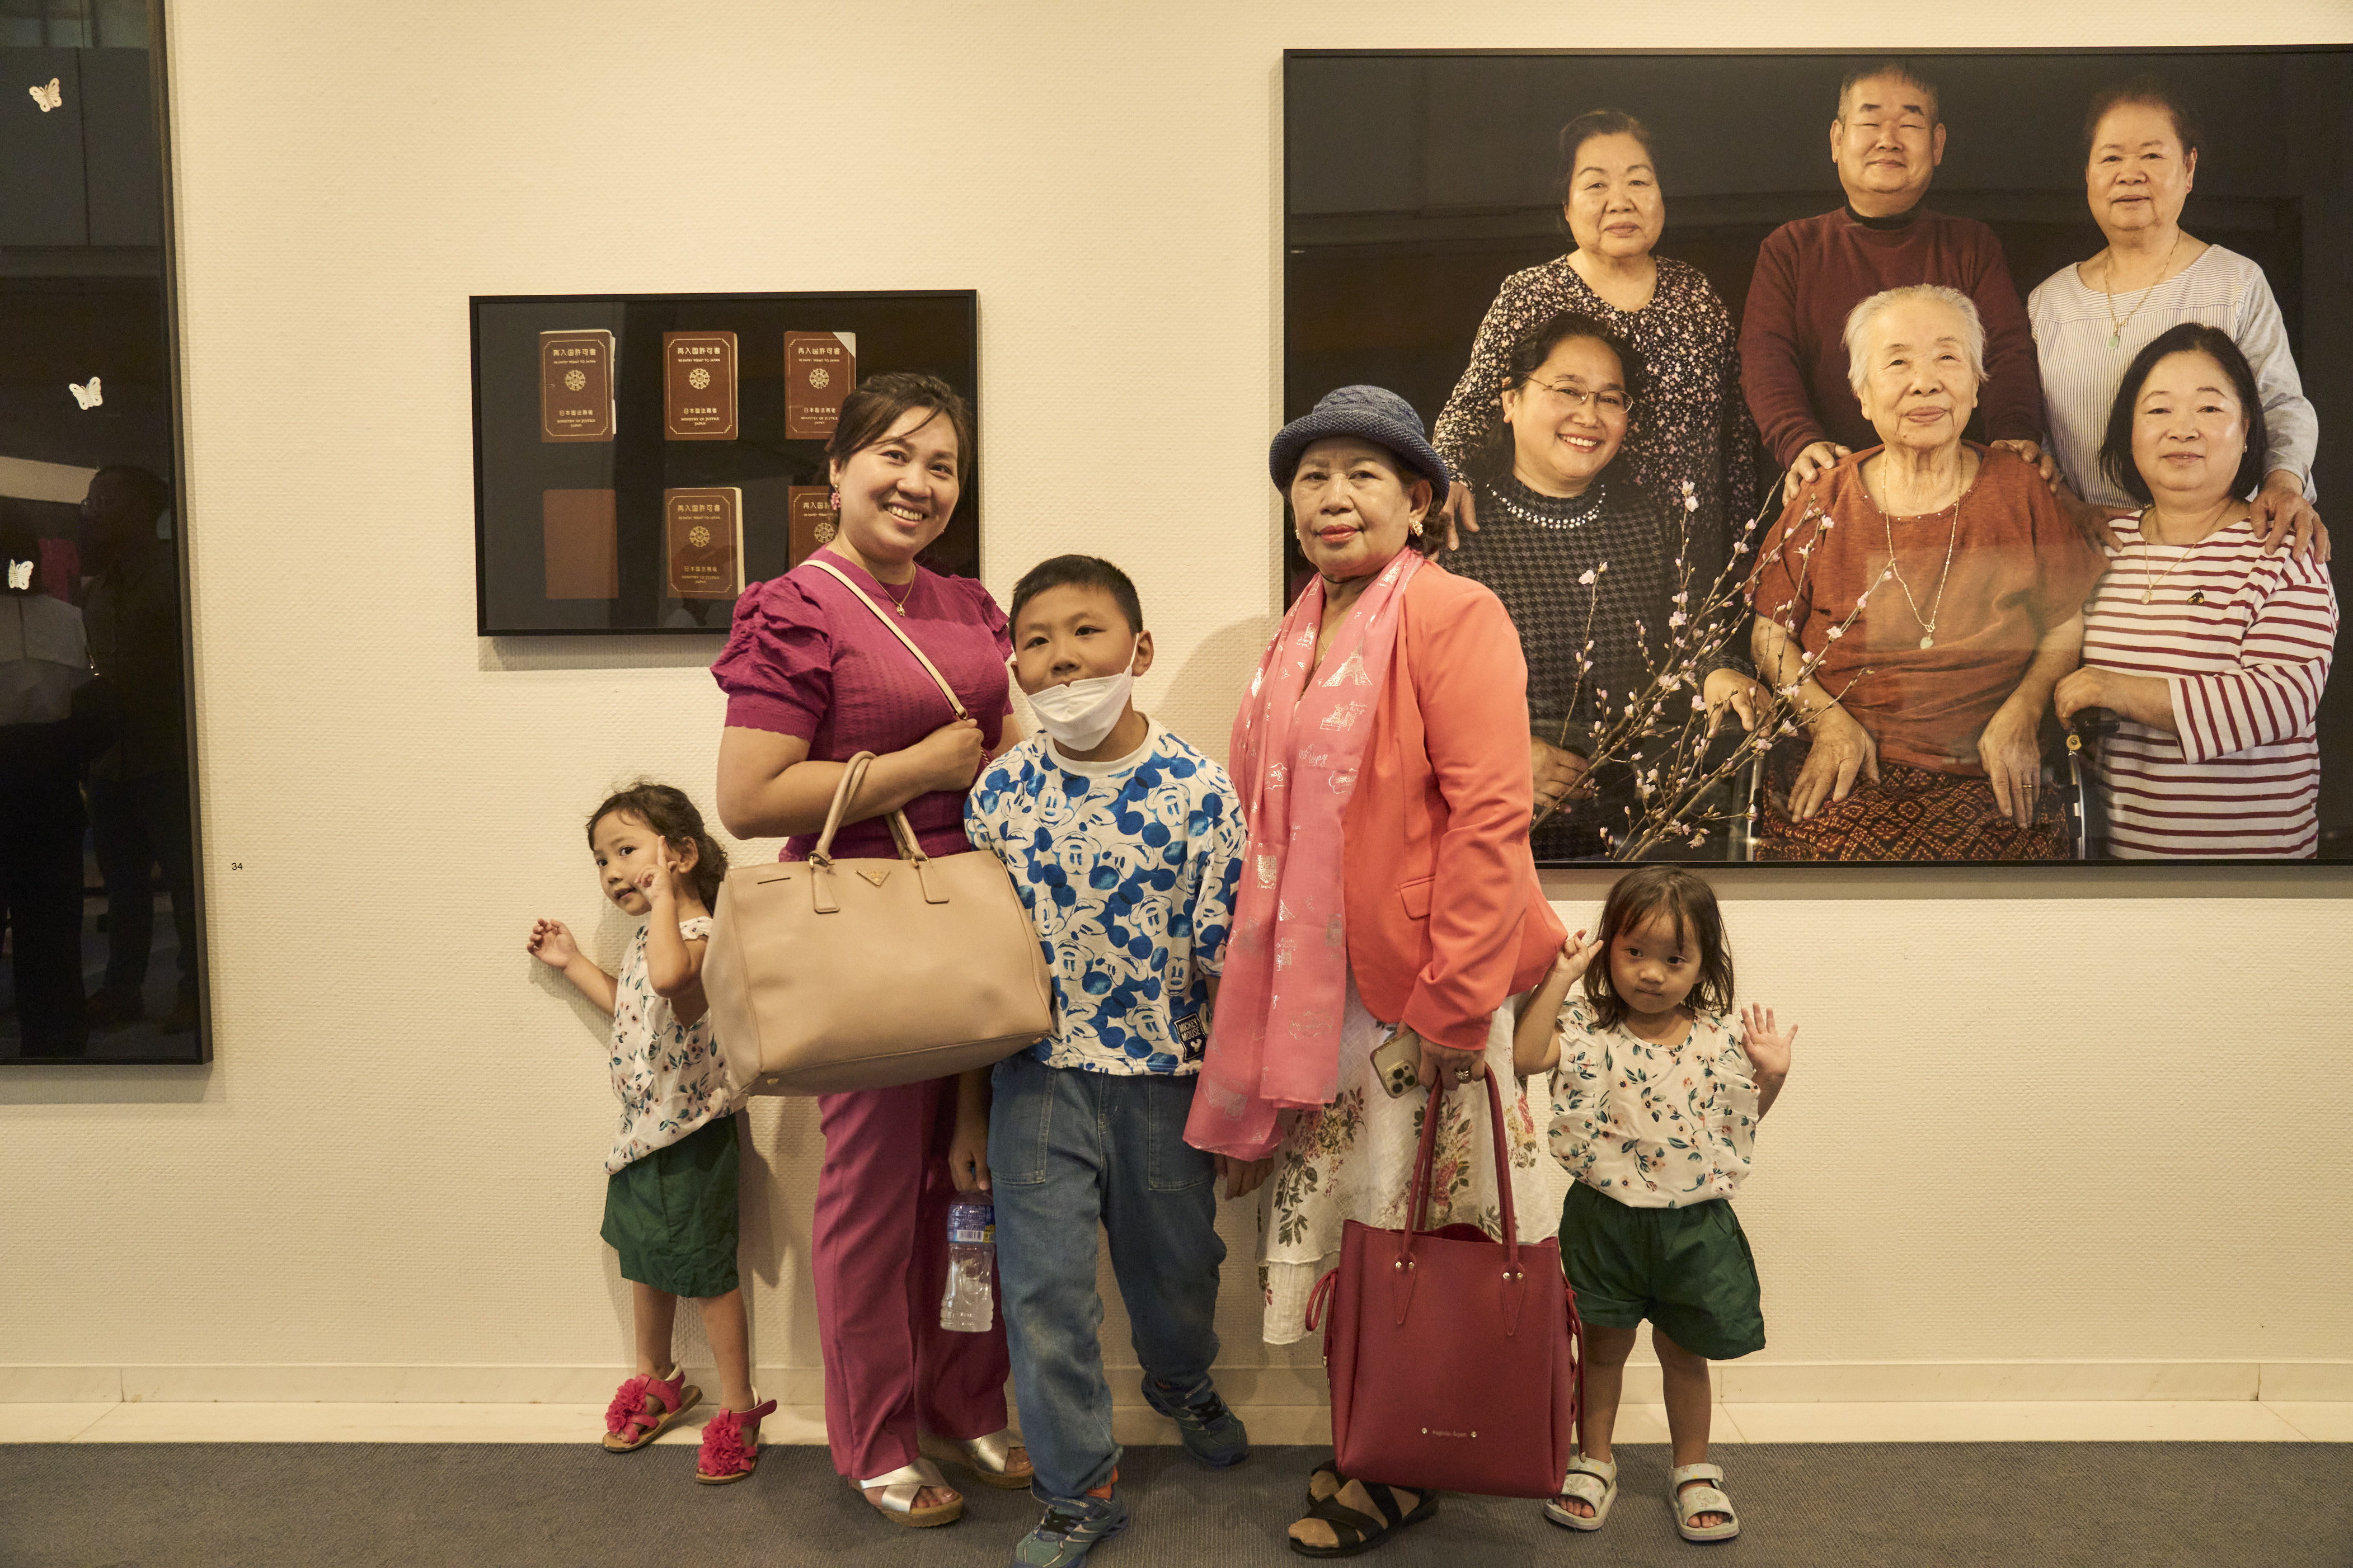 Slider Image A family with Cambodian roots attending Kim Hak's exhibition. Photography by Ryo Fujishima.
<br>キム・ハクの展示会に来場したカンボジア系の家族　写真：藤島 亮